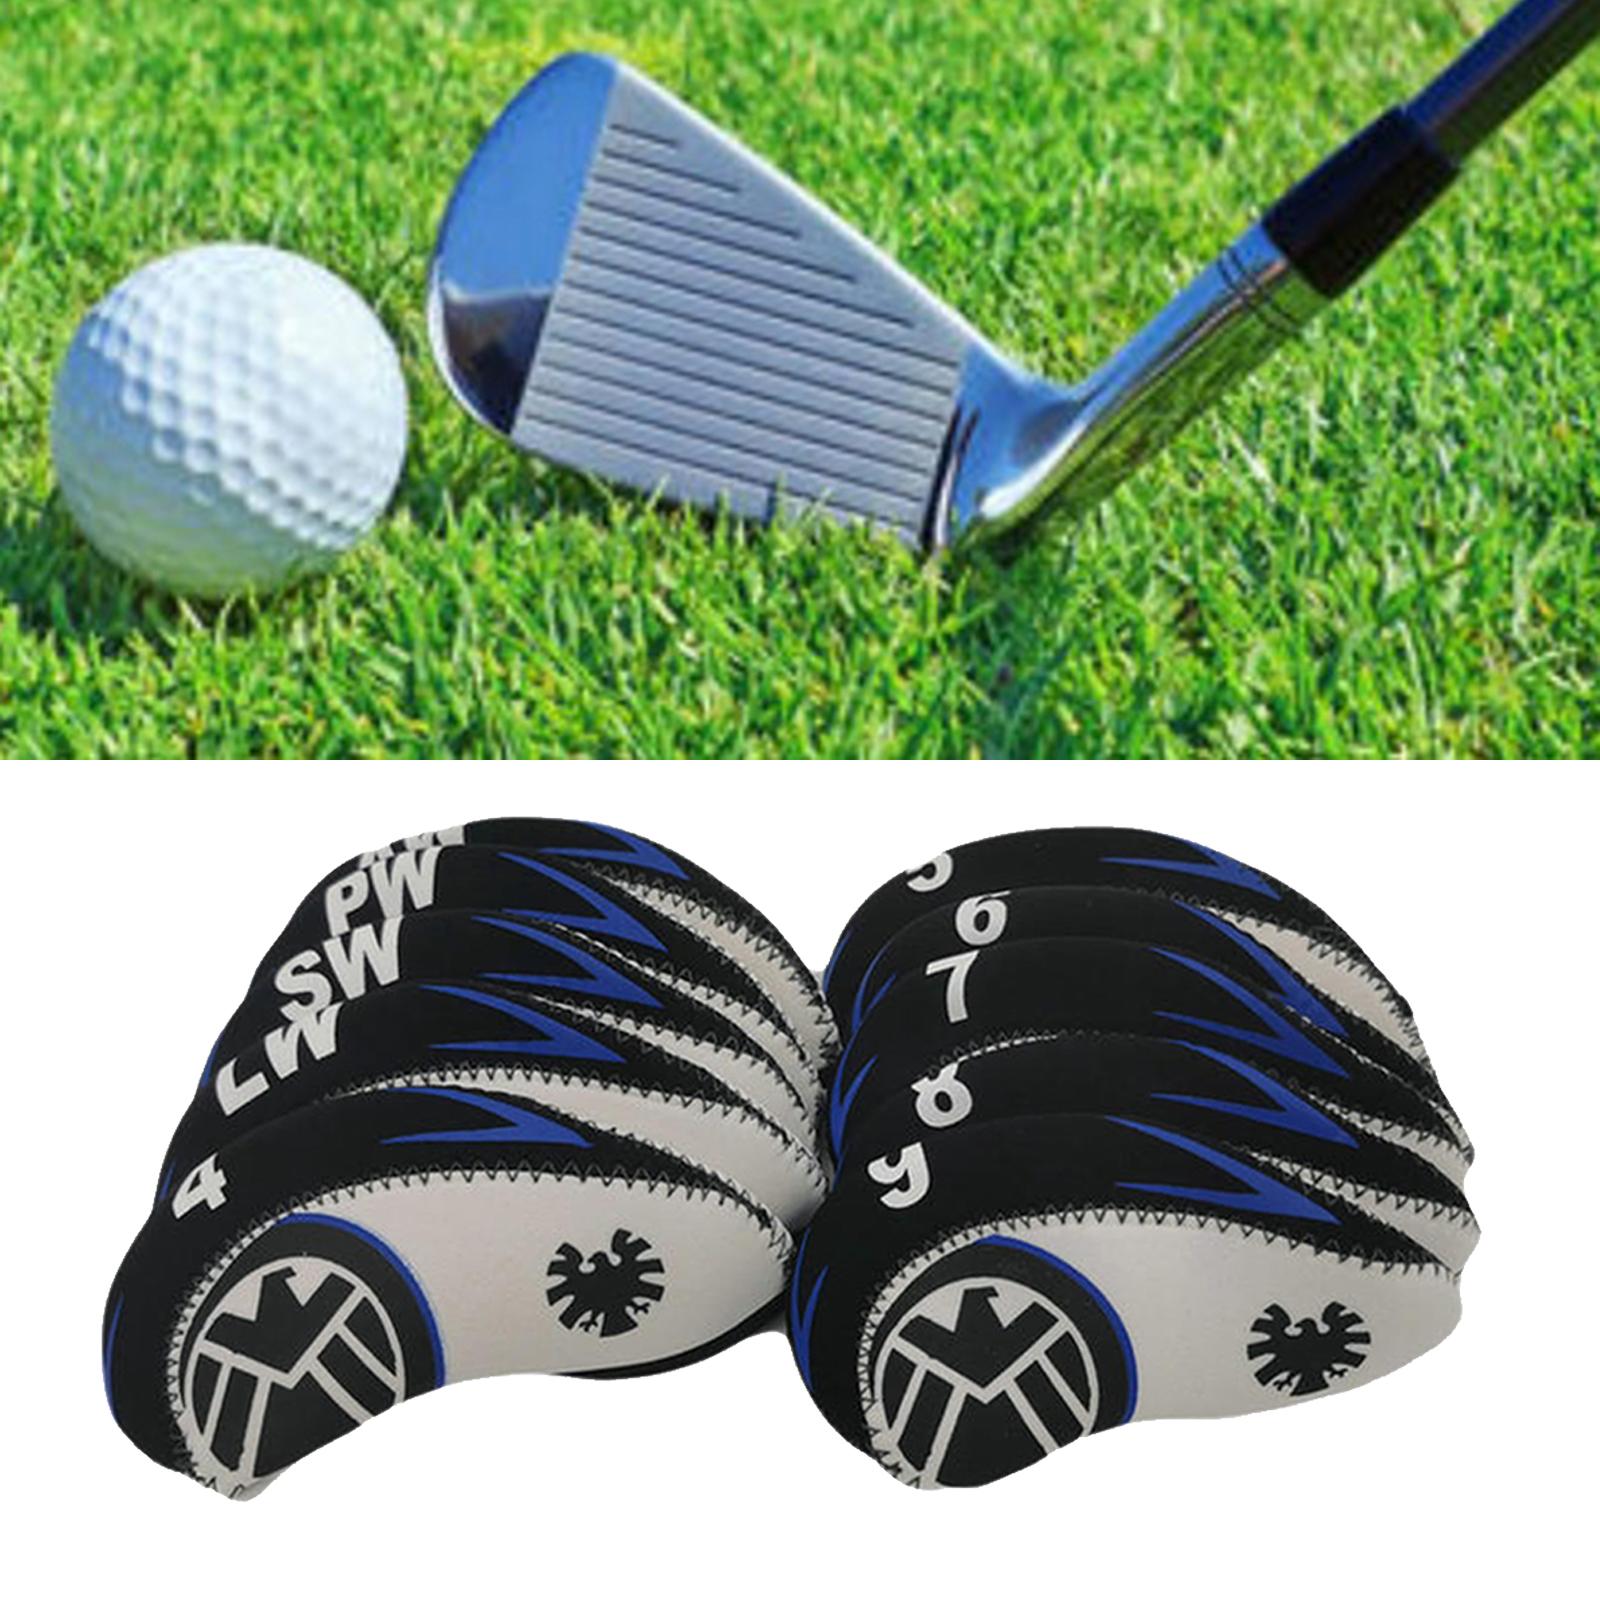 10pcs/set Golf Club Iron Head Cover Protection Headcover Fits Most Brands for Golf Lovers